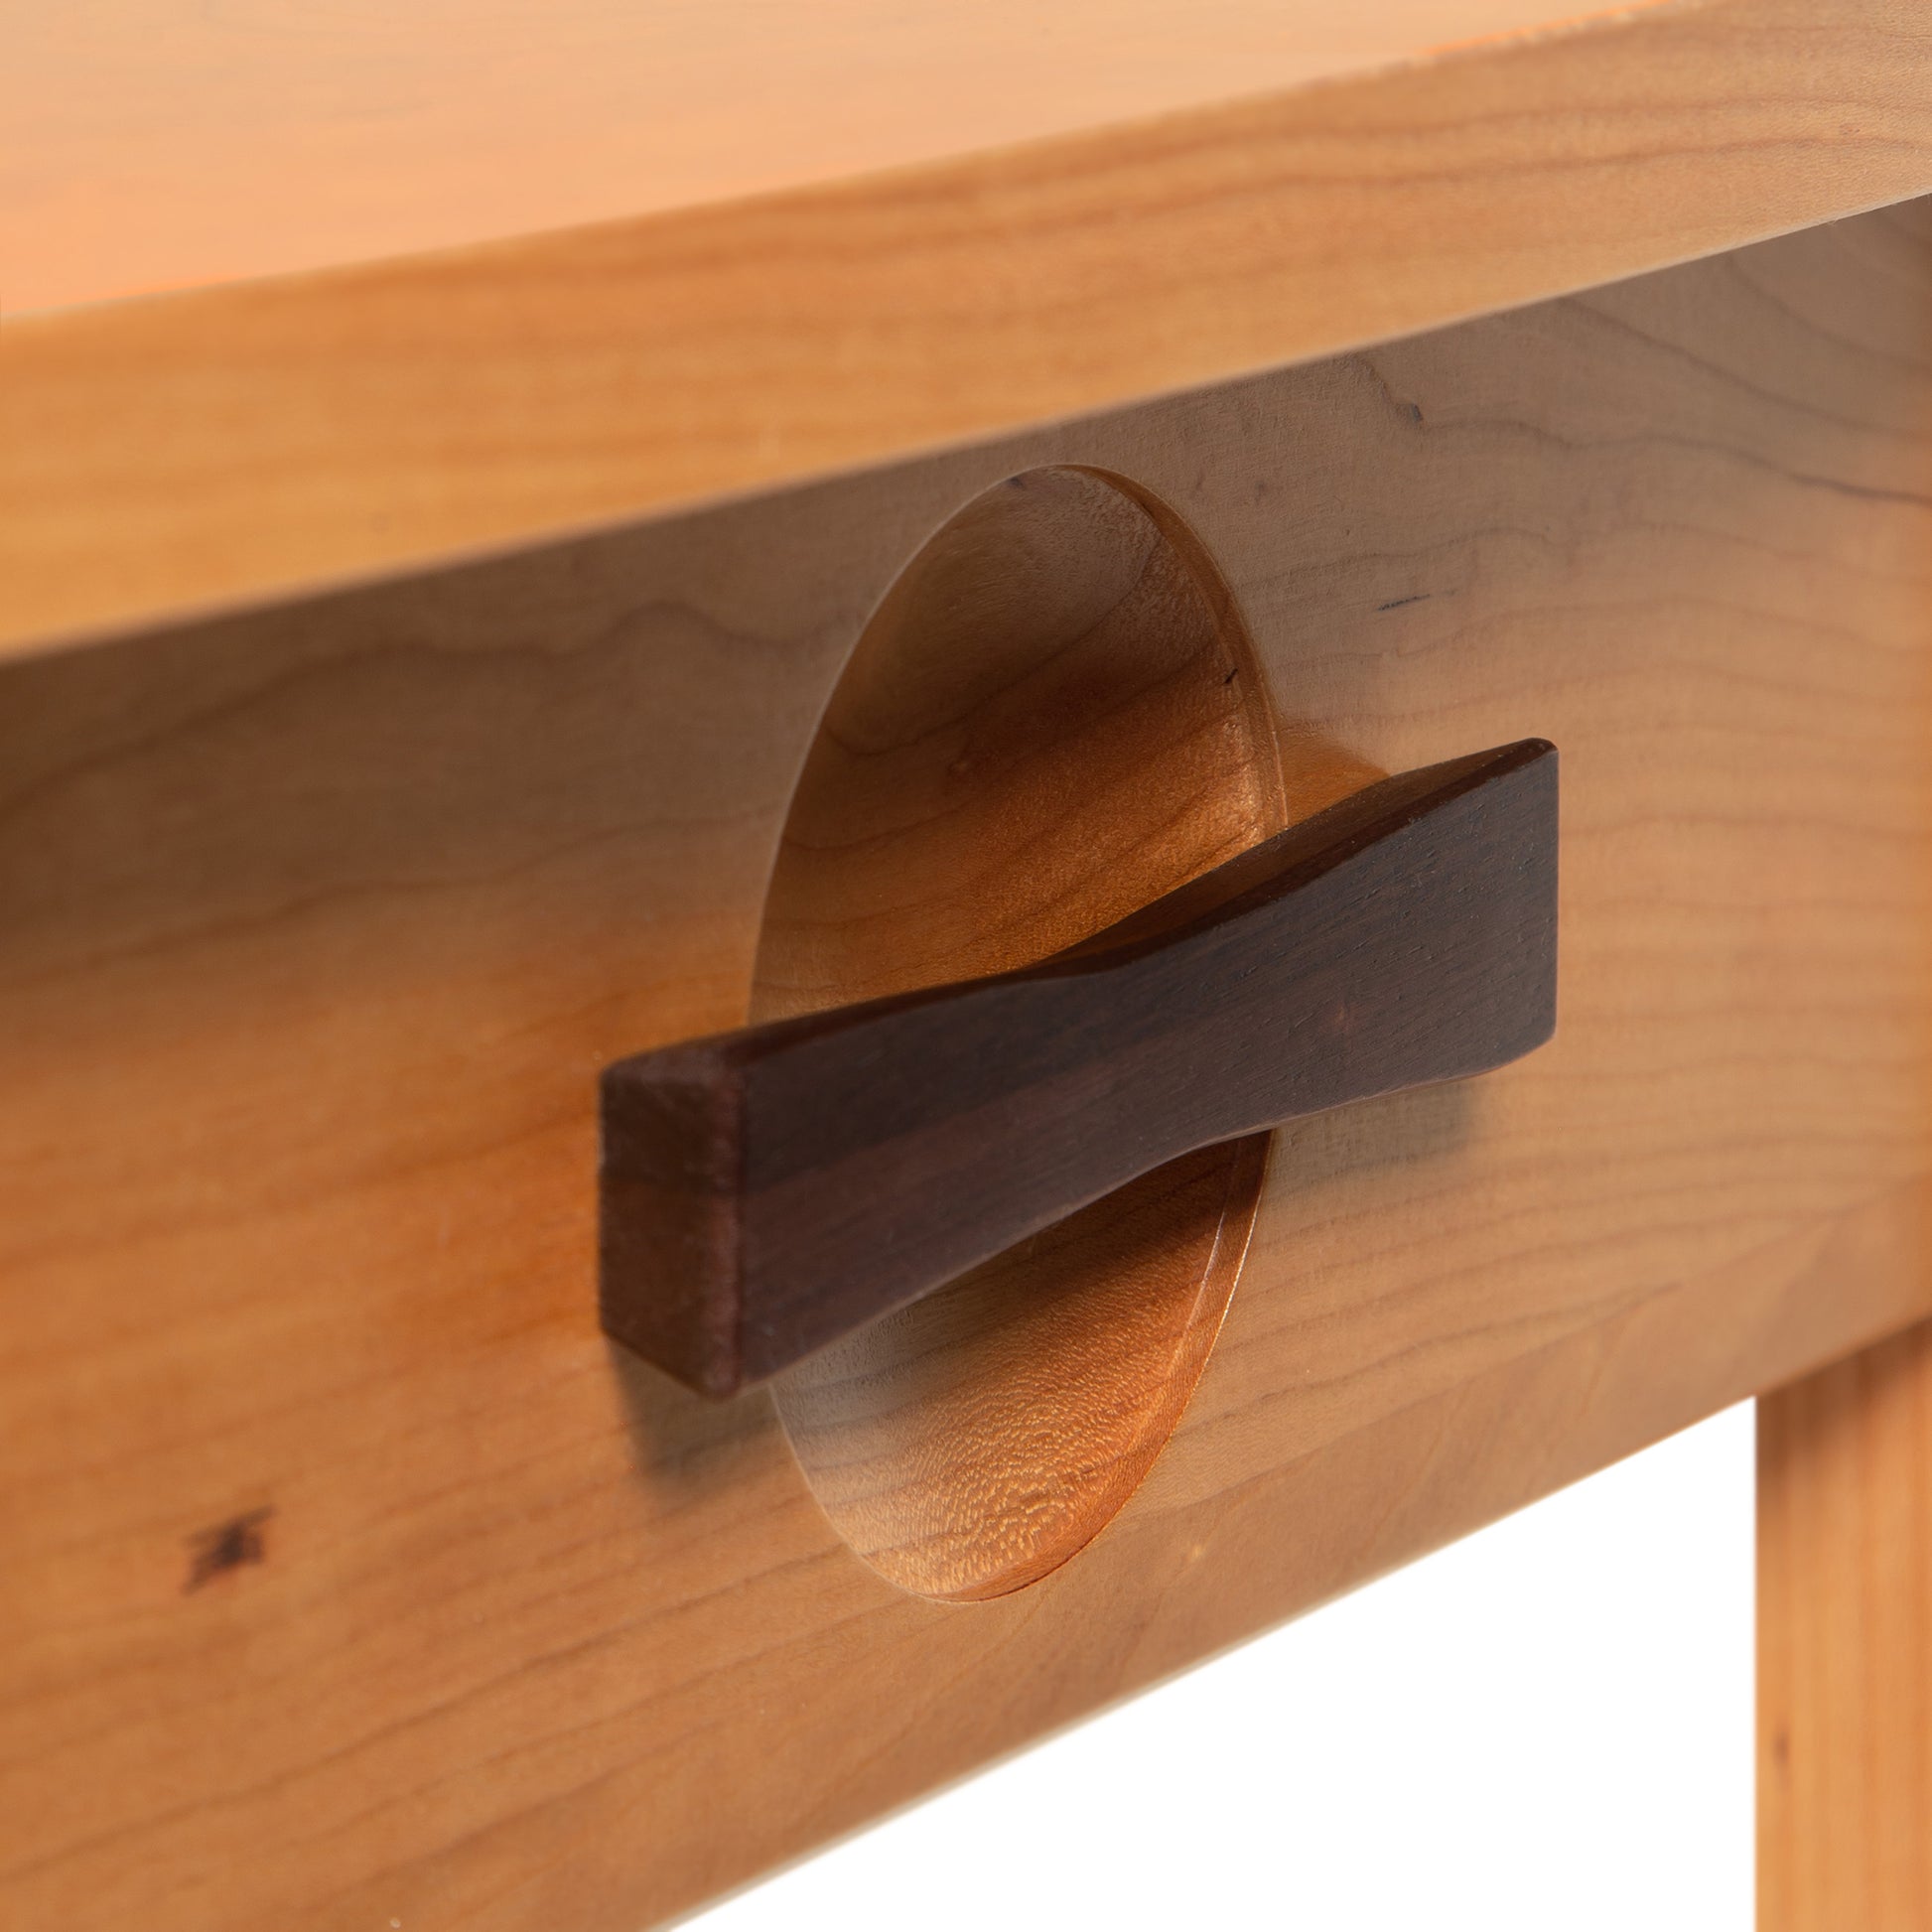 Close-up of a Copeland Furniture Berkeley 1-Drawer Open Shelf Nightstand in solid cherry wood, showcasing its handle and grain texture.